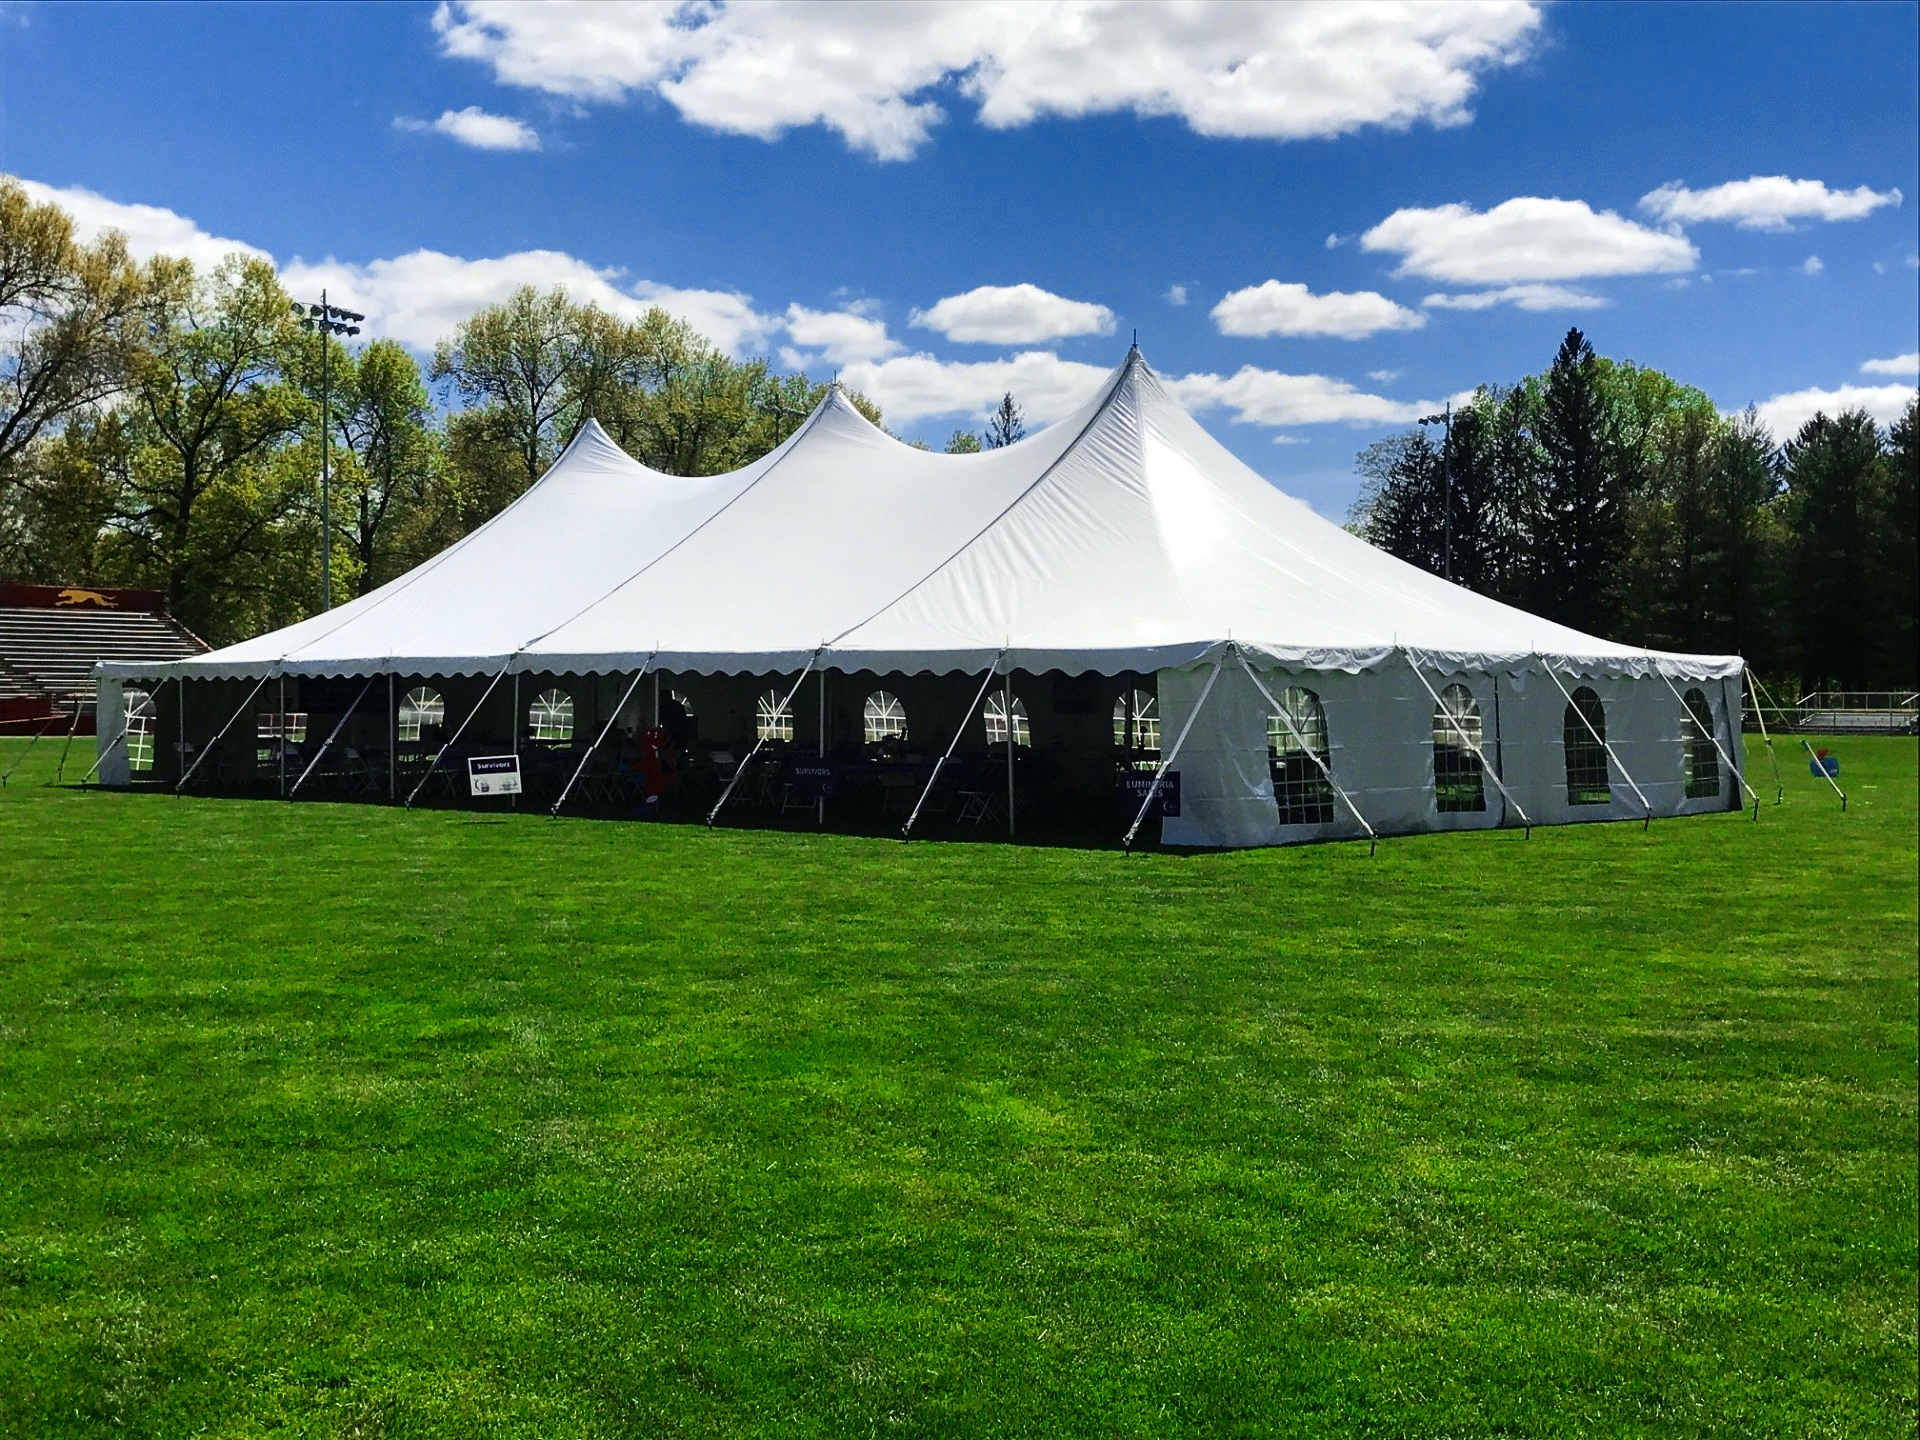 TNT Tent & Event Rentals in Western MA, Northern CT and New England